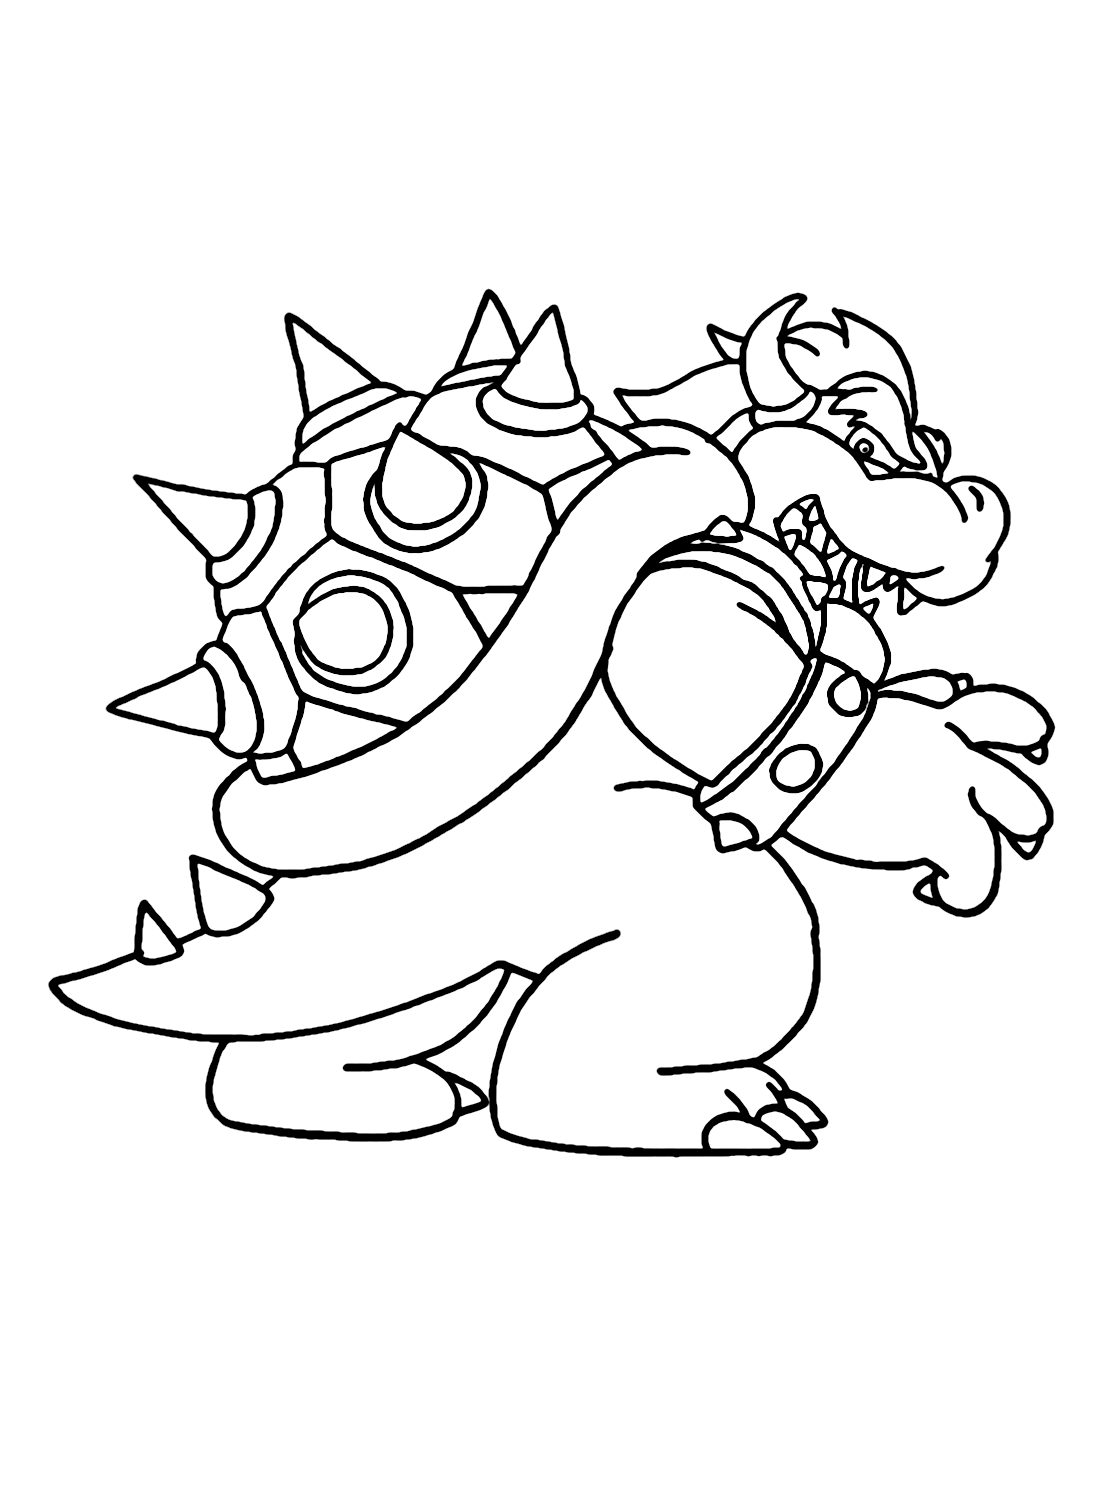 Bowser Mario Images Coloring Pages